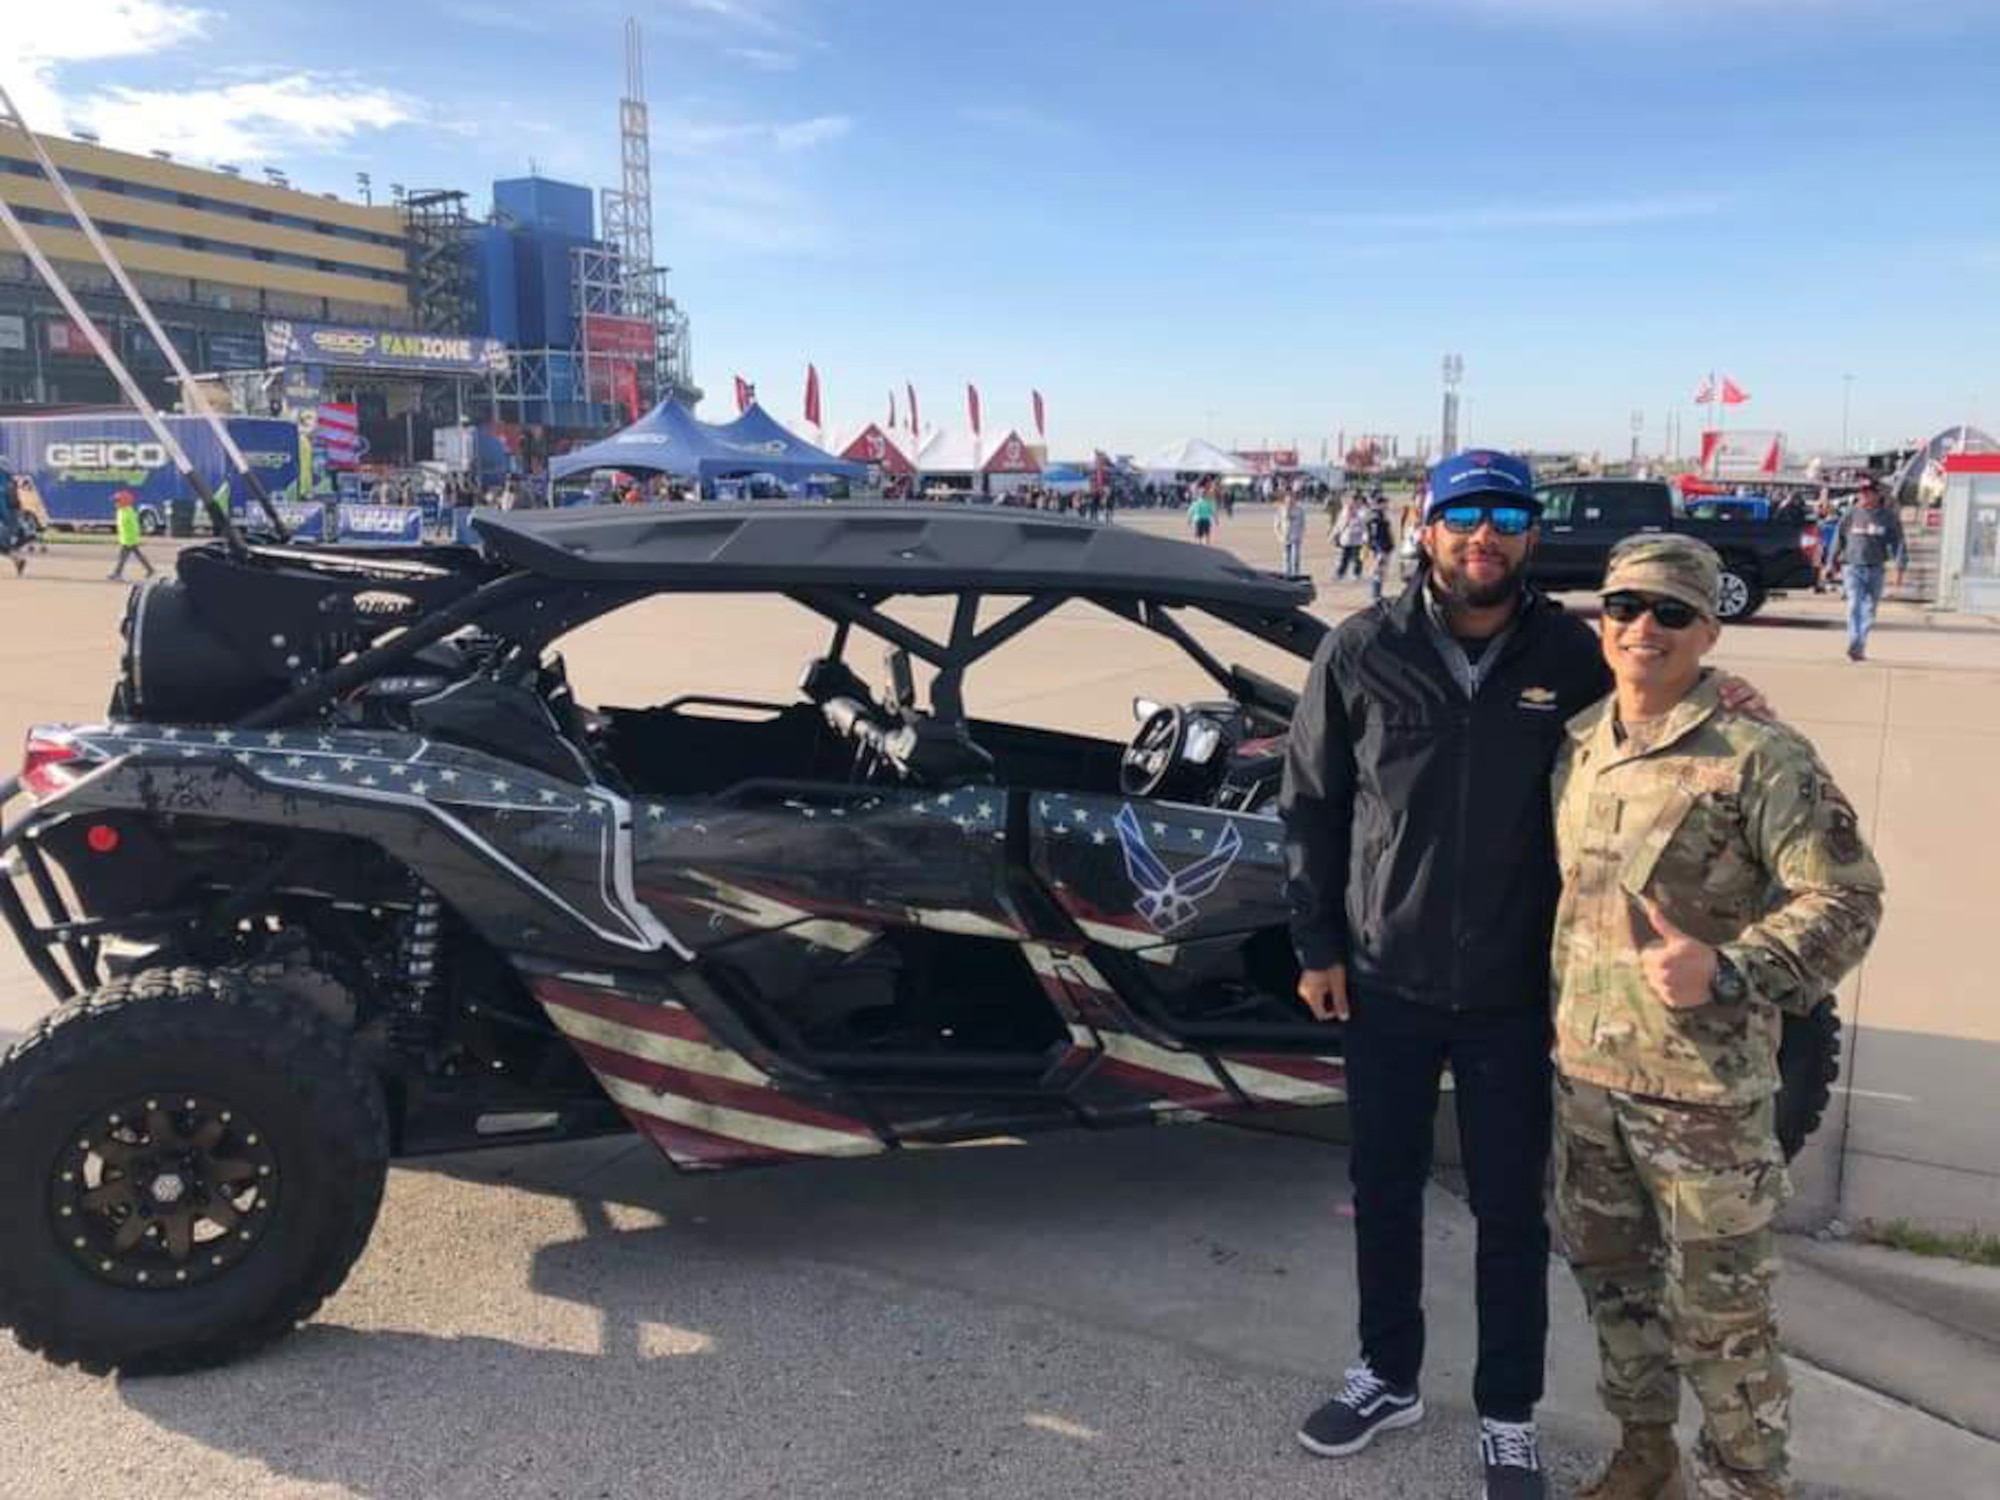 Bubba Wallace, the driver of the Air Force-sponsored Richard Petty Motorsport’s No. 43 car, poses with Tech. Sgt. Alvin Llamas, of the 349th Recruiting Squadron, in front of the squadron’s Bounty Hunter prior to the Hollywood Casino 400 race October, 20, 2019 in Kansas City, Kansas.